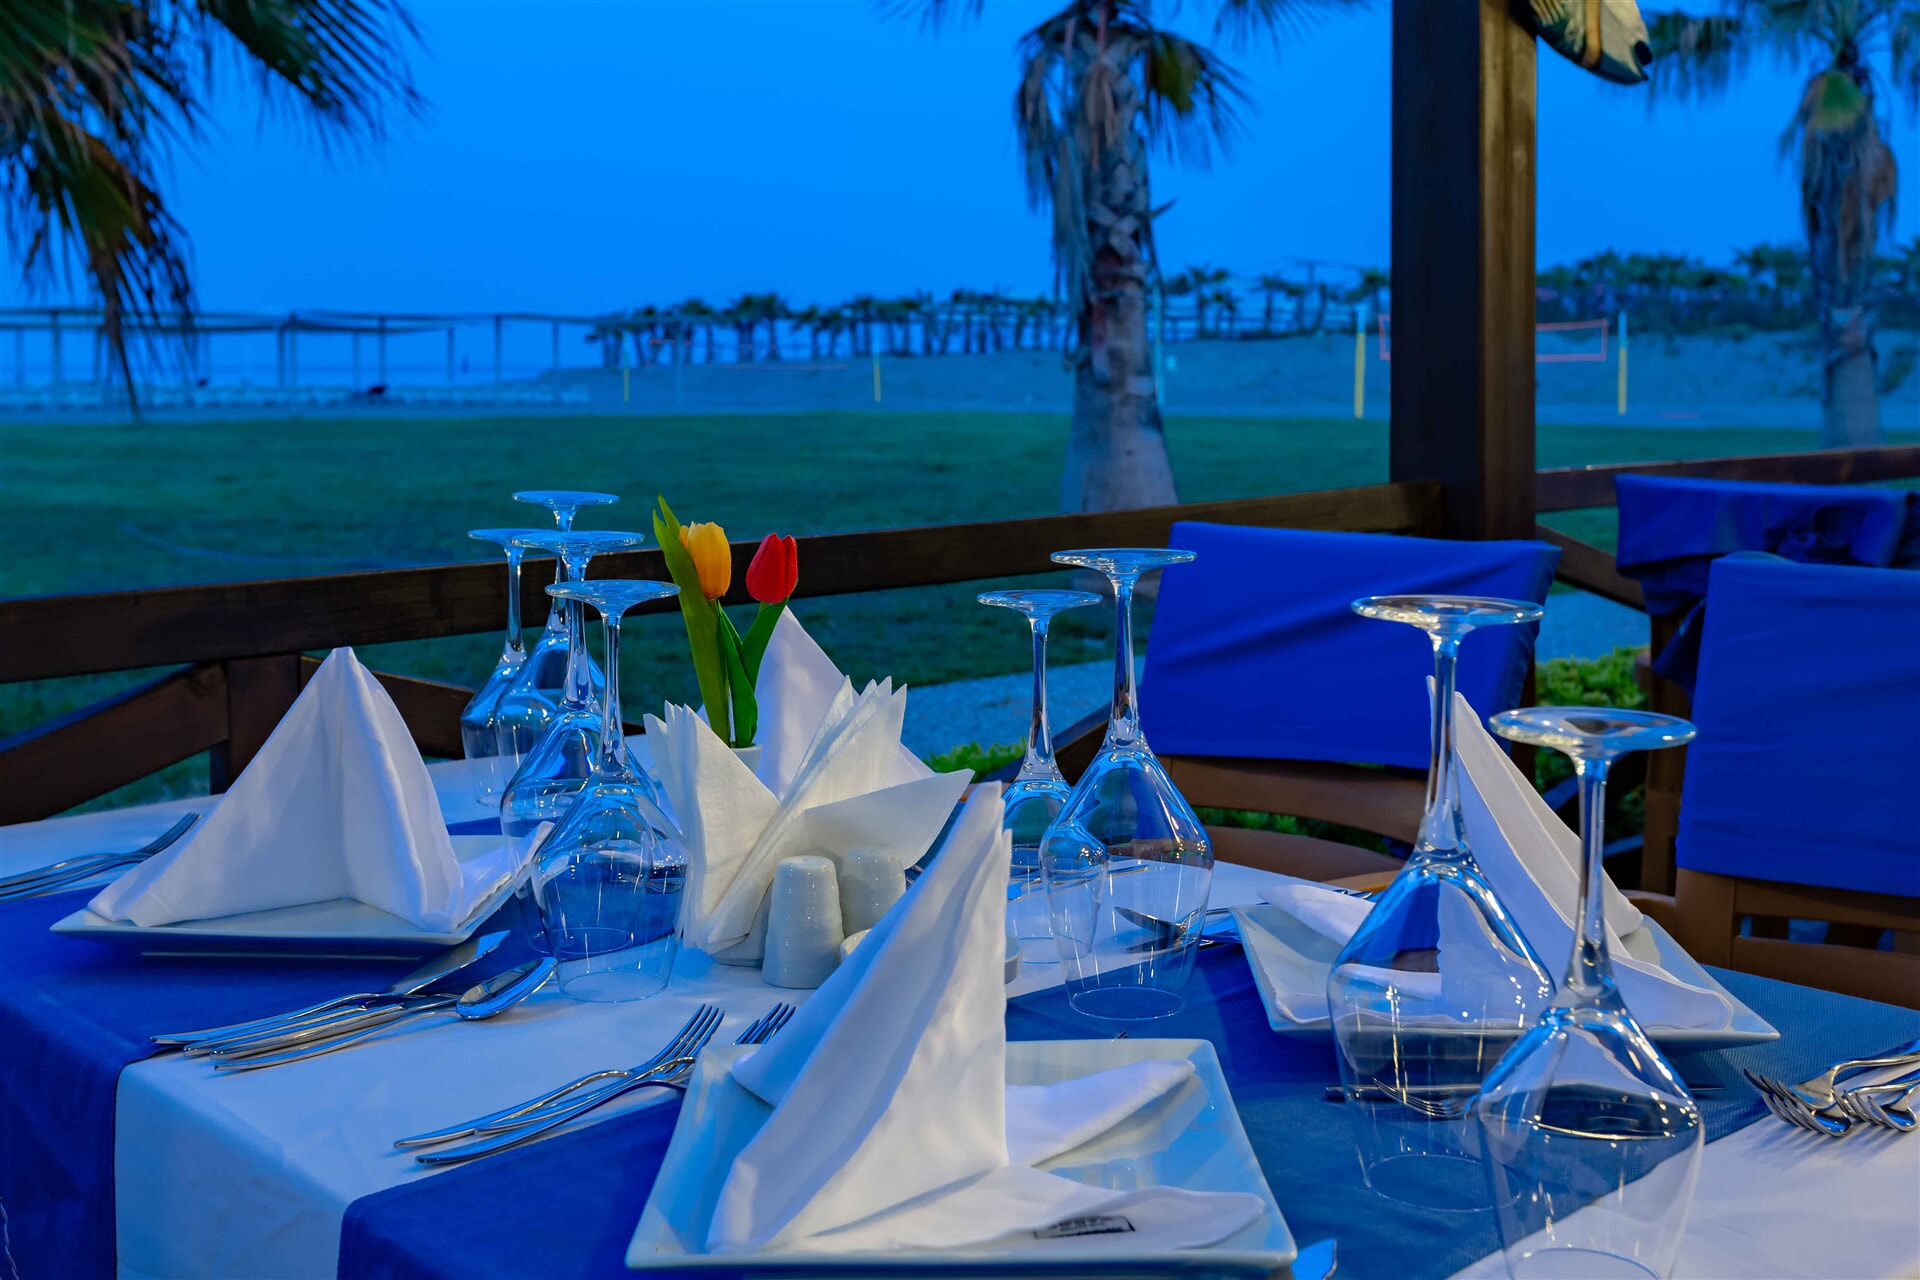 Seasonal fish and seafood menu accompanied by a romantic landspace will add color to your evenings.